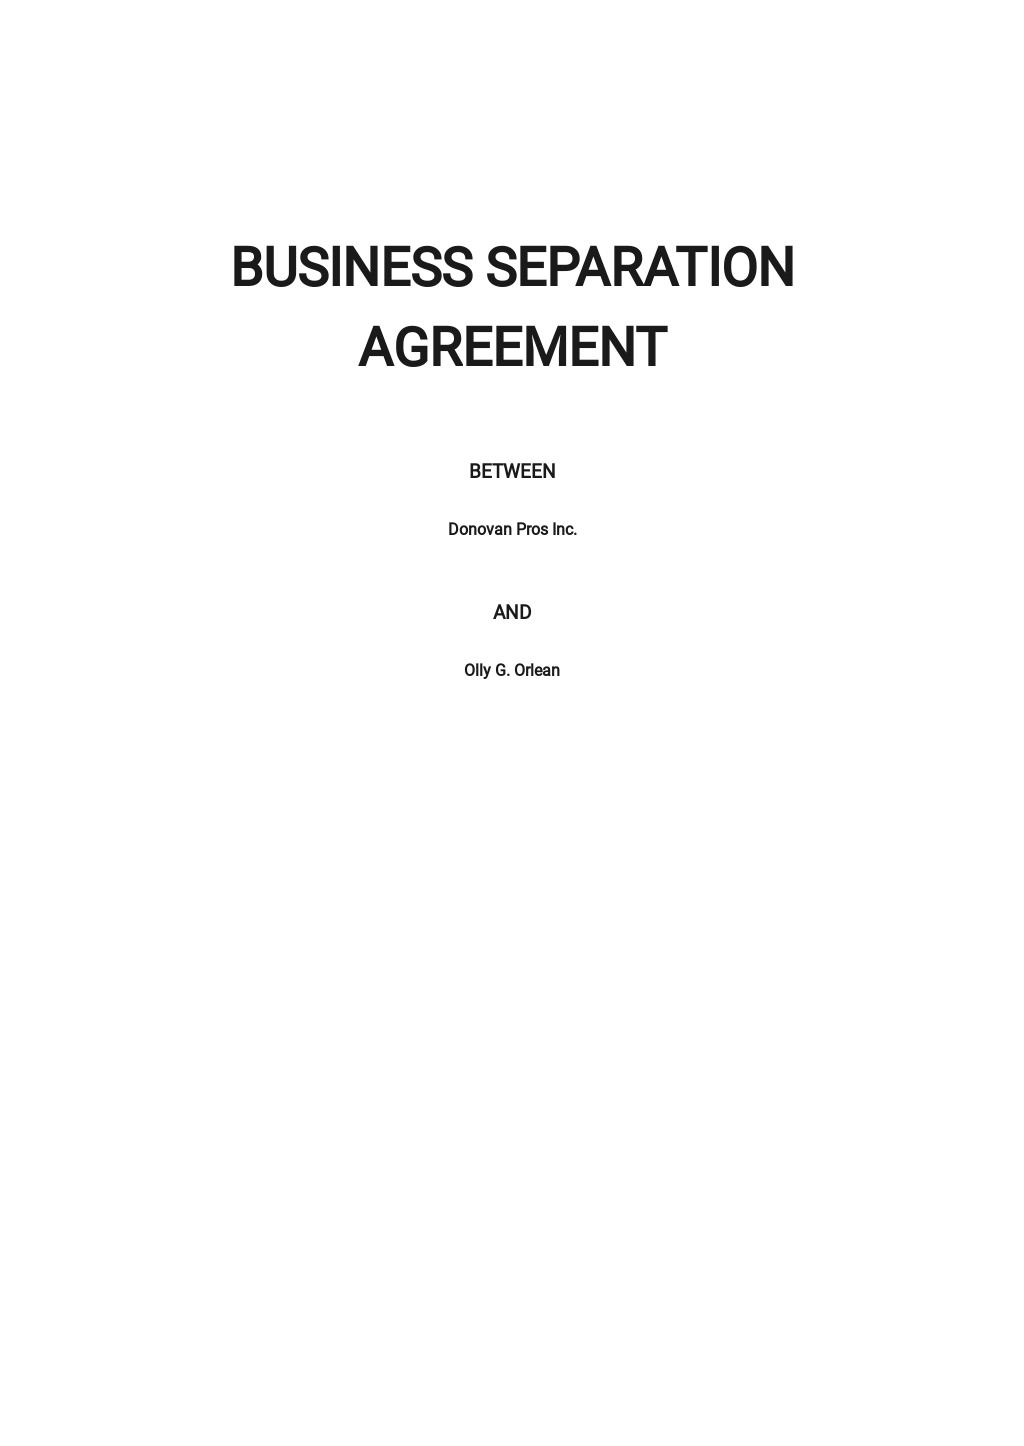 Business Separation Agreement Template .jpe